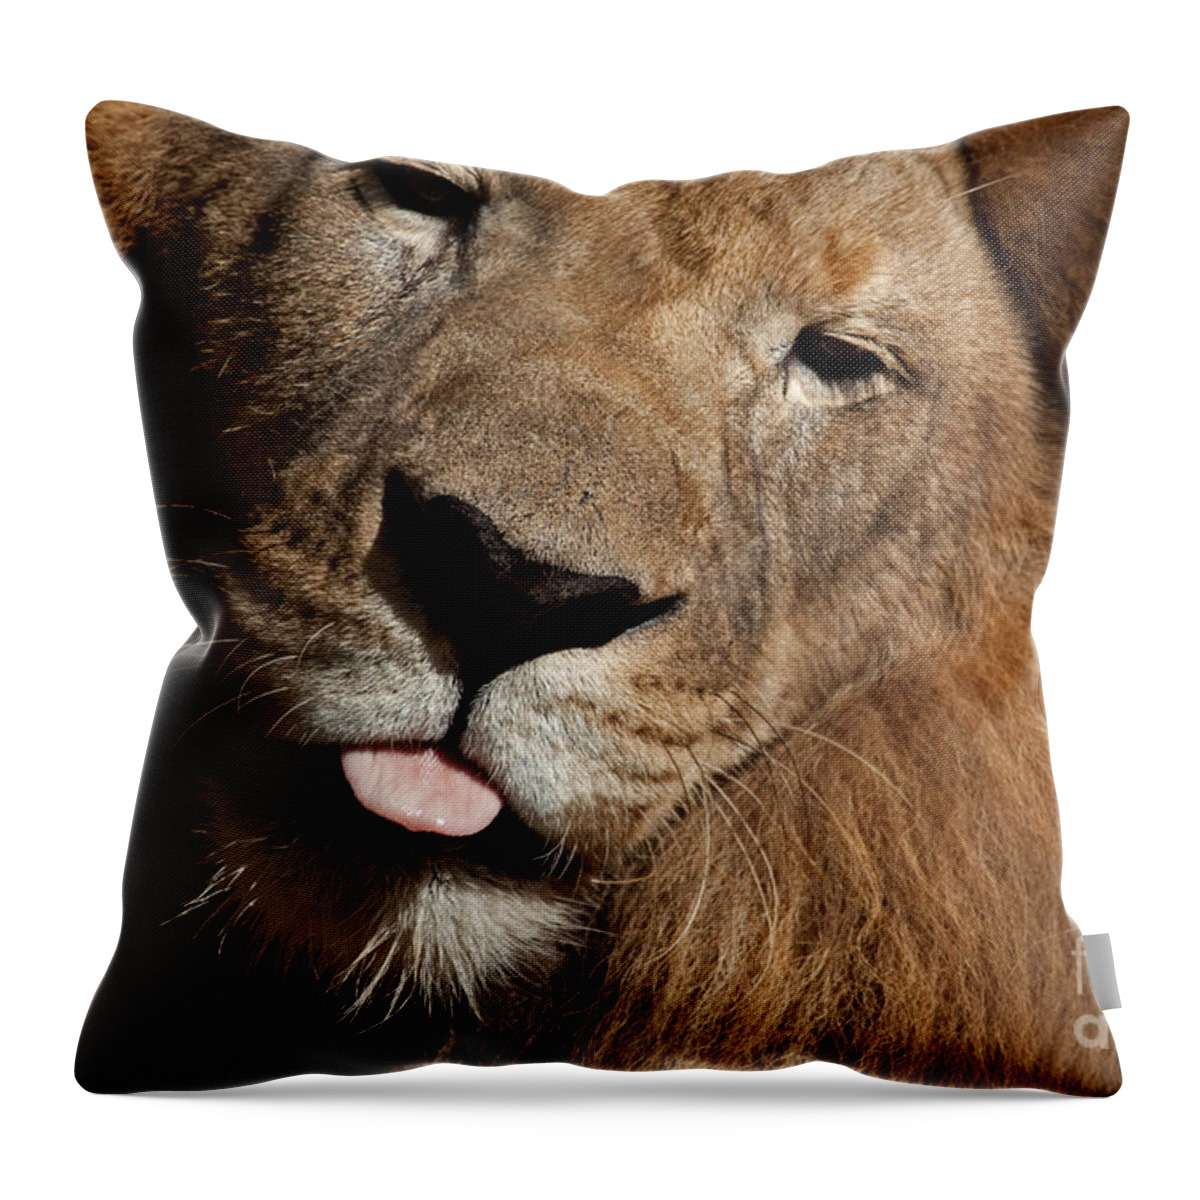 Lion Throw Pillow featuring the photograph African Lion by Meg Rousher